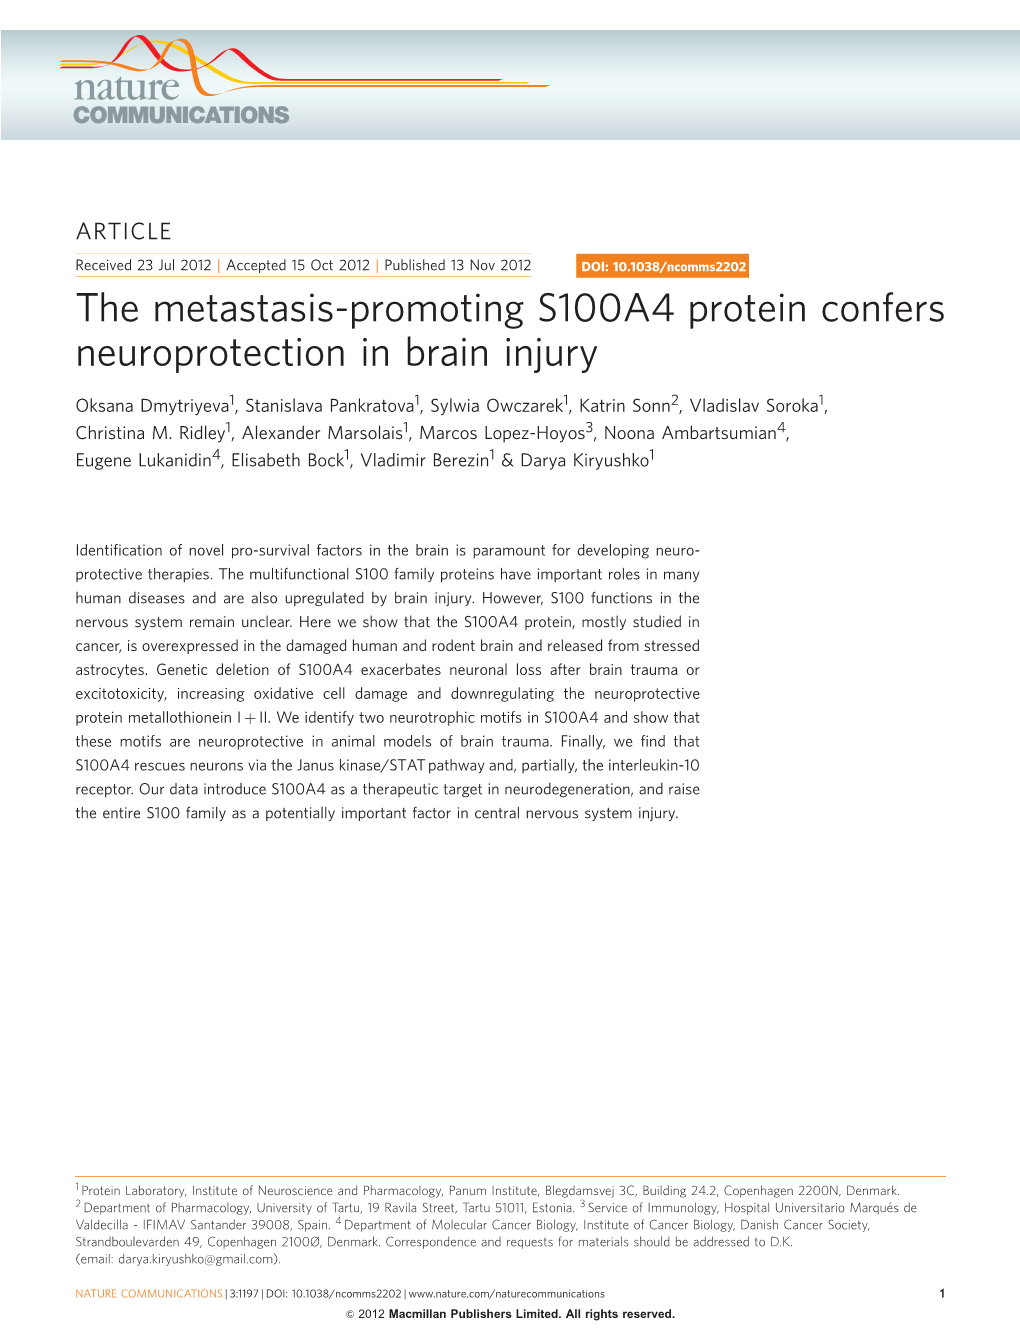 The Metastasis-Promoting S100A4 Protein Confers Neuroprotection in Brain Injury